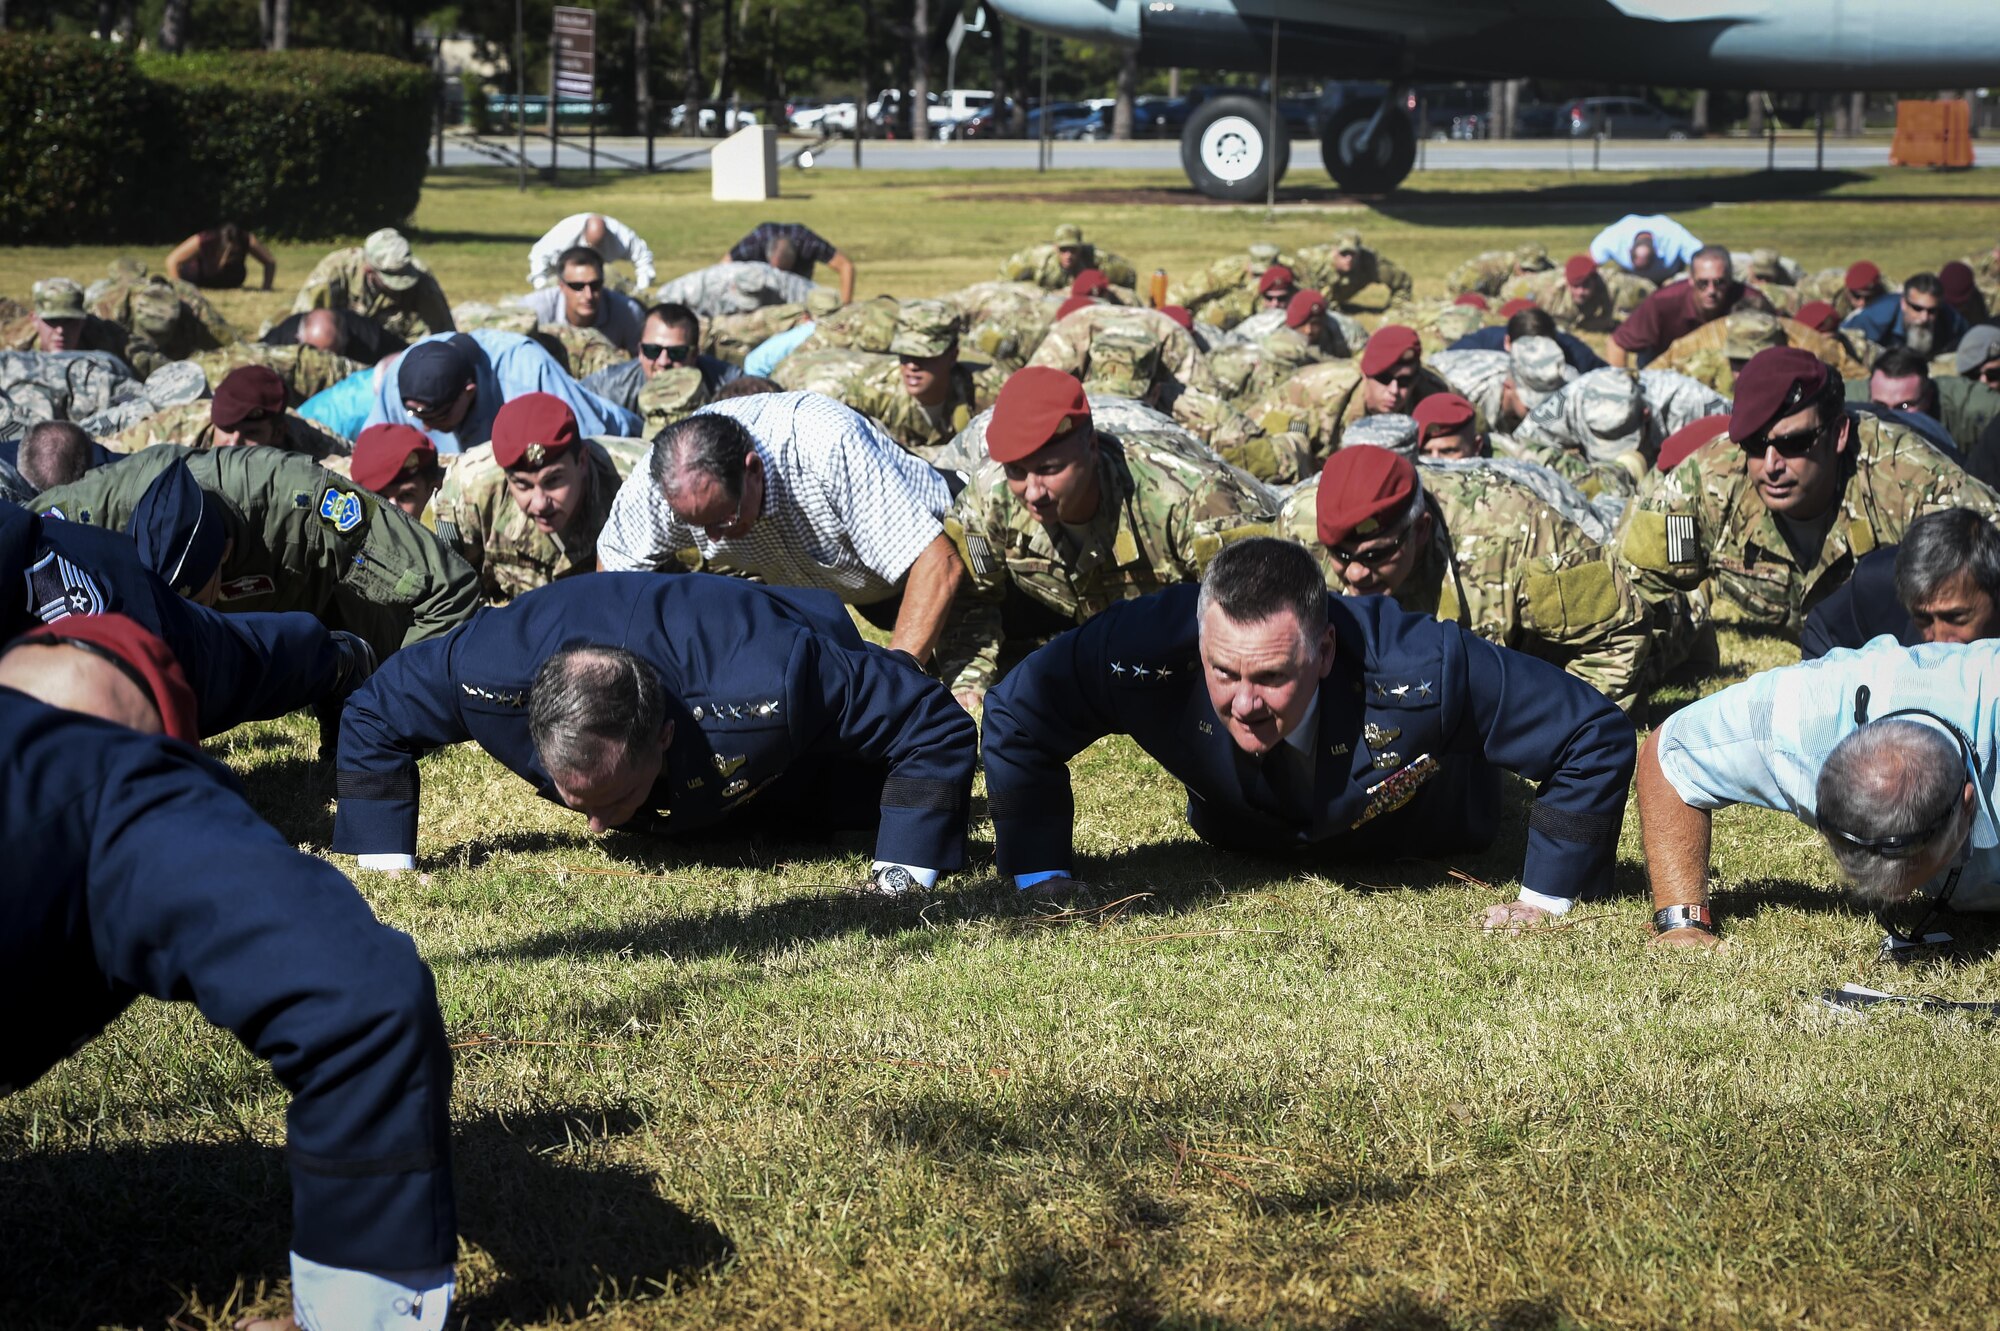 Air Force Chief of Staff David L. Goldfein and Lt. Gen. Brad Webb, the commander of Air Force Special Operations Command, perform memorial push-ups following the Special Tactics Memorial dedication ceremony at Hurlburt Field, Fla., Oct. 20, 2016. Goldfein was the keynote speaker for the ceremony. In addition to the ceremony, he met with Air Force Special Operations Command leadership, 505th Command and Control Wing personnel and Air Commandos around base. (U.S. Air Force photo by Senior Airman Jeffrey Parkinson)